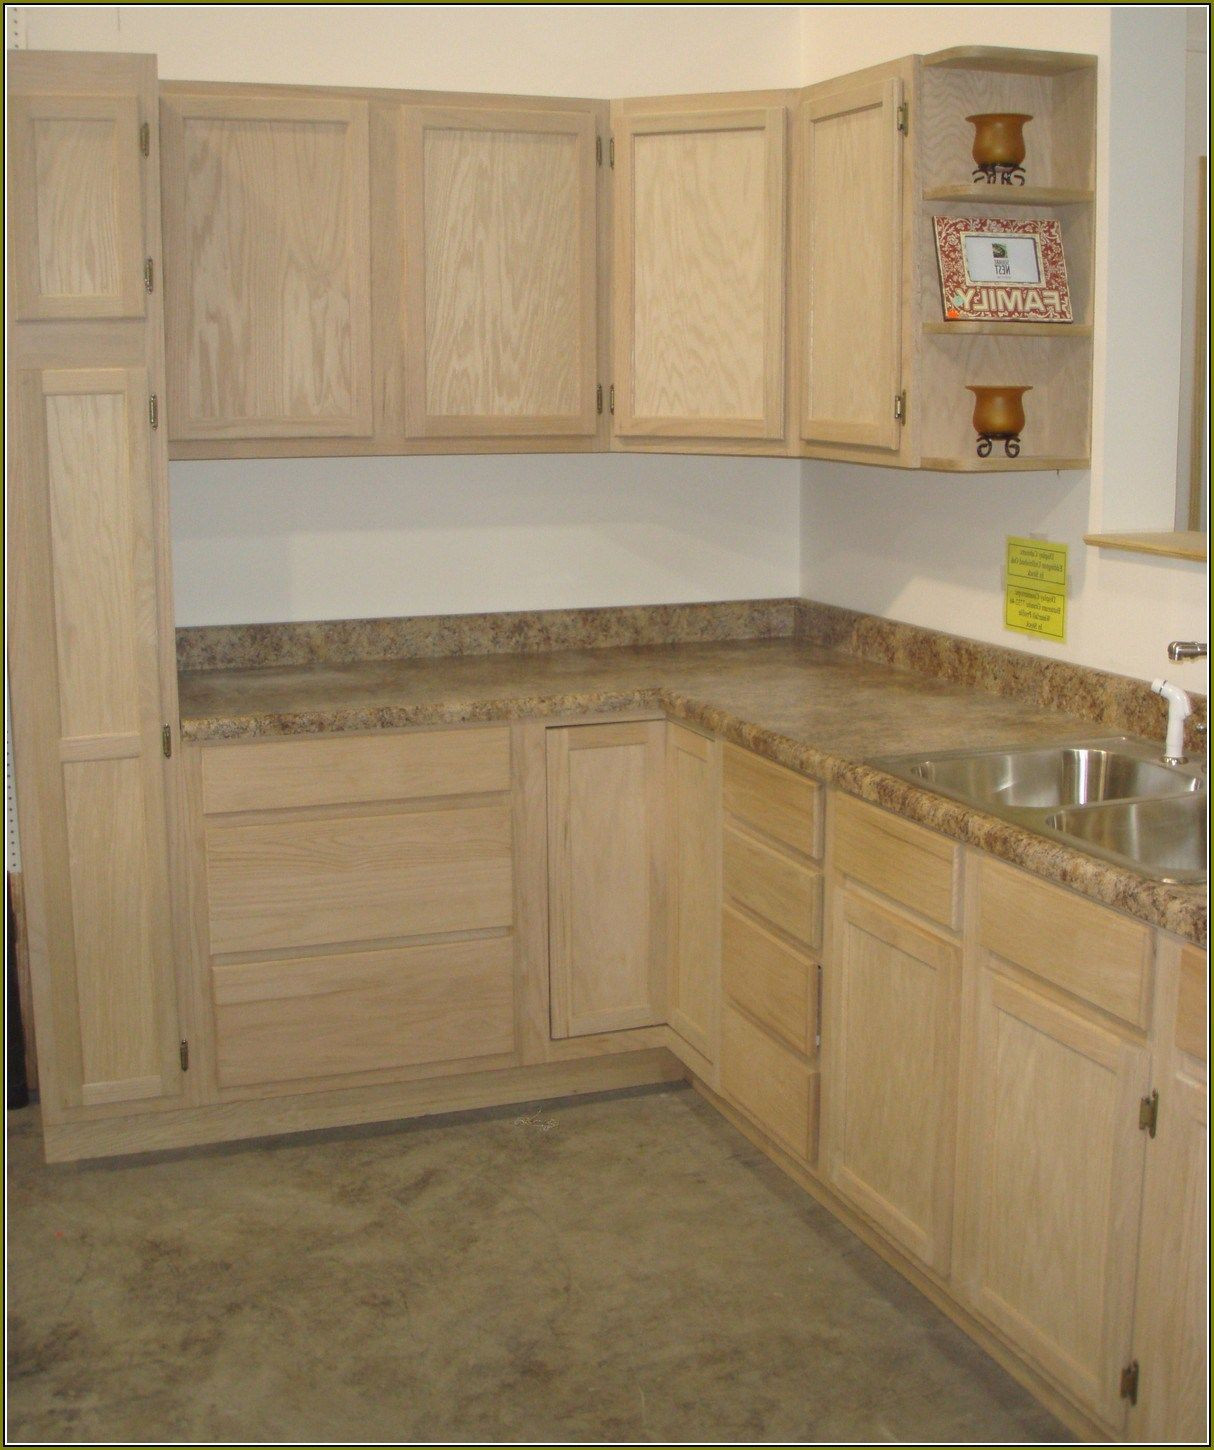 Lowes Unfinished Kitchen Cabinets
 Lowes Unfinished Kitchen Cabinets In Stock